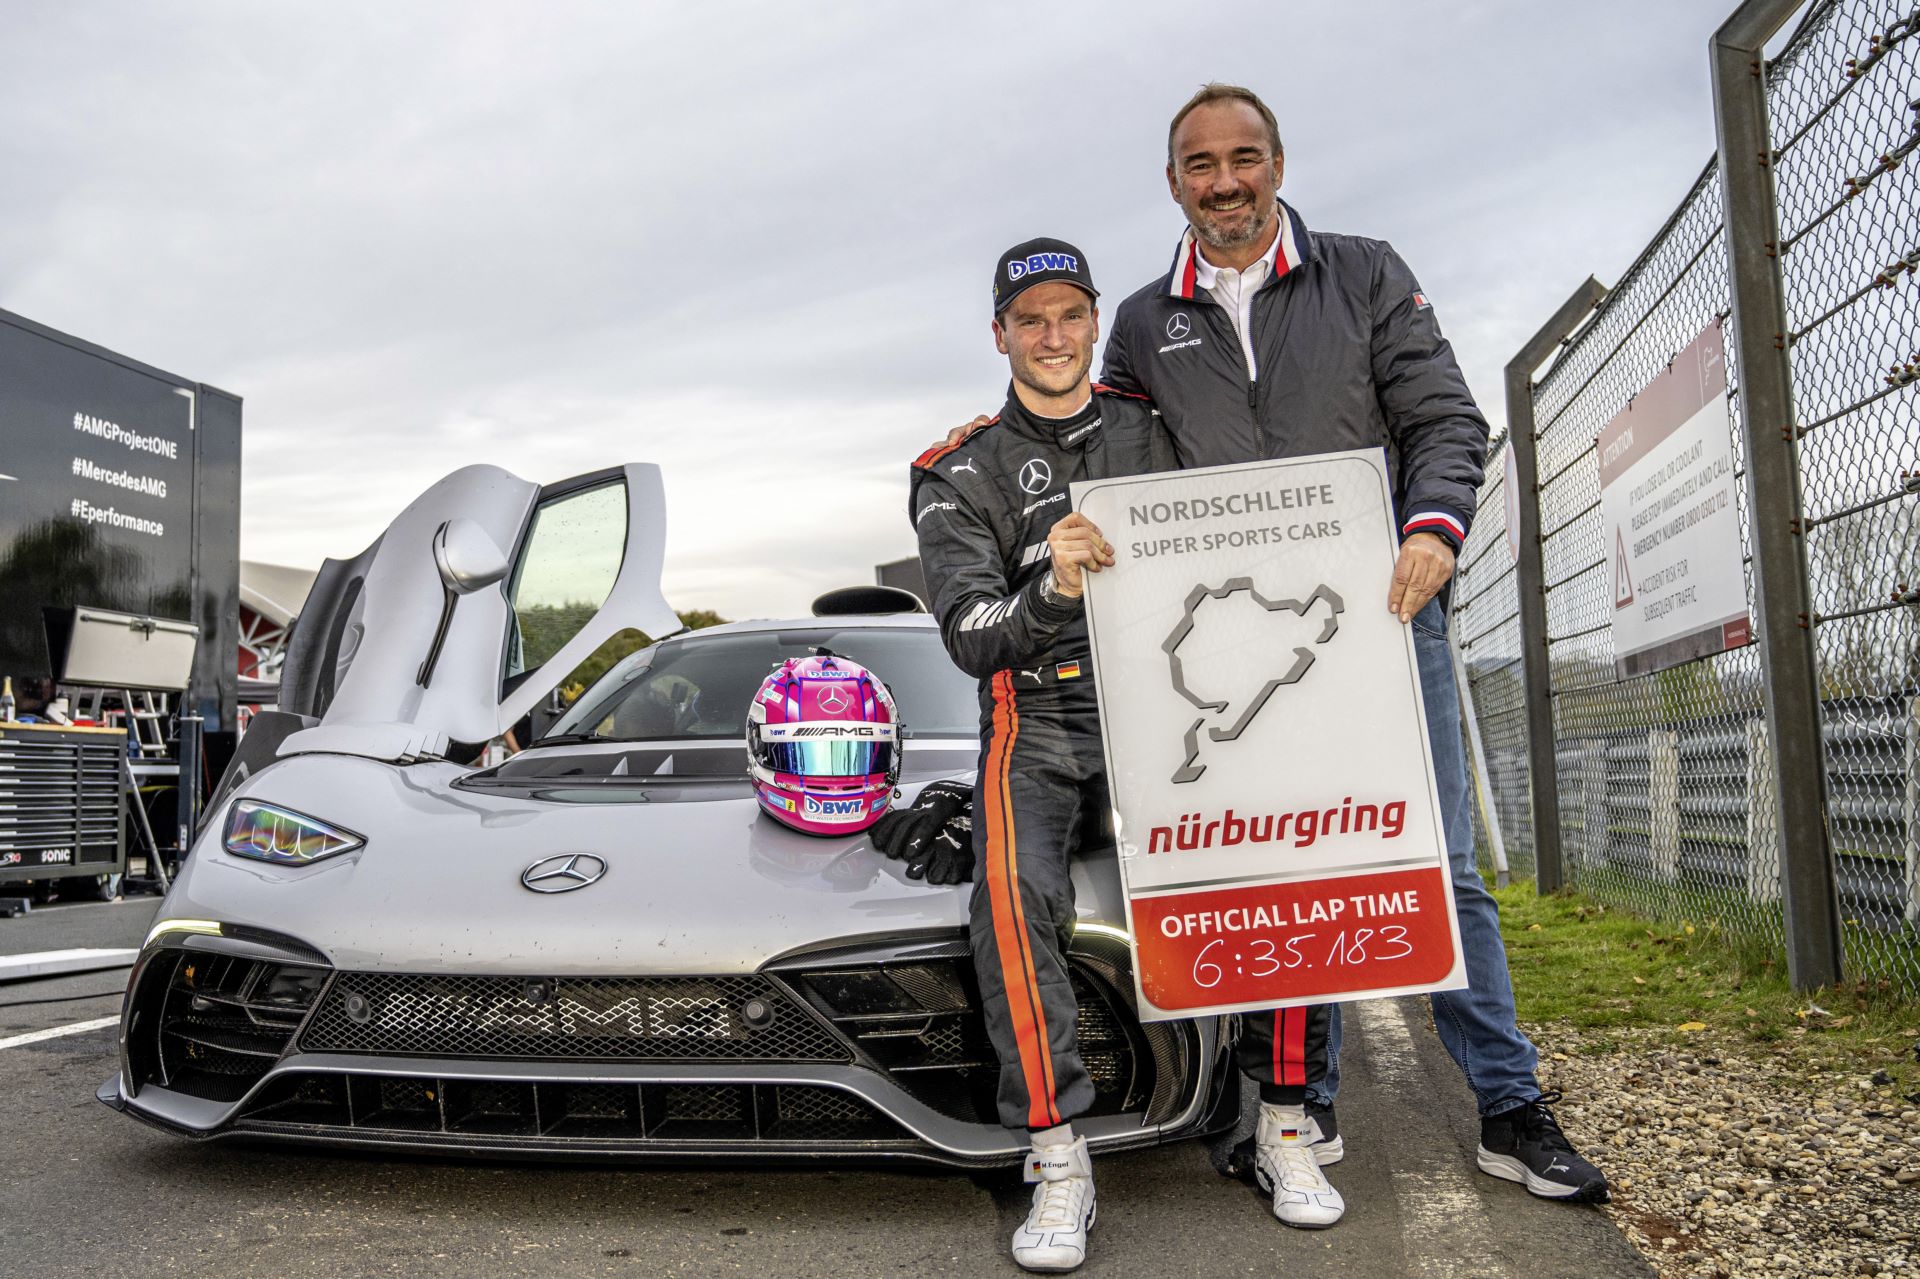 Mercedes-AMG-One-Nurburgring-Nordschleife-record-13